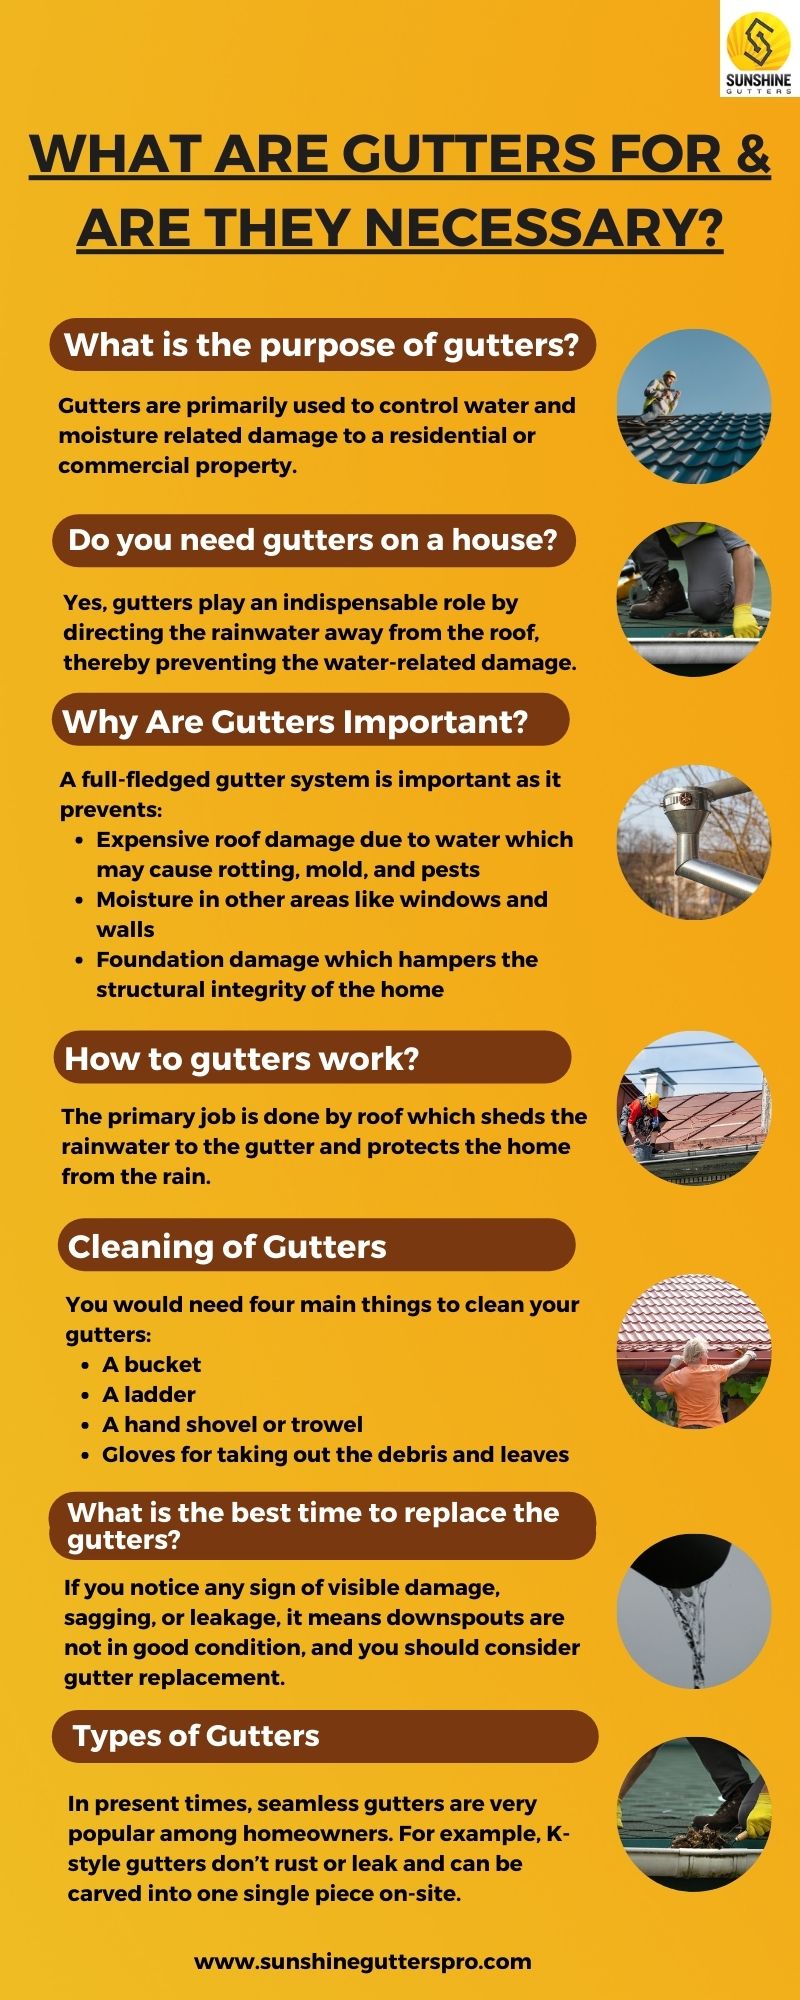 What Are Gutters For & Are They Necessary?